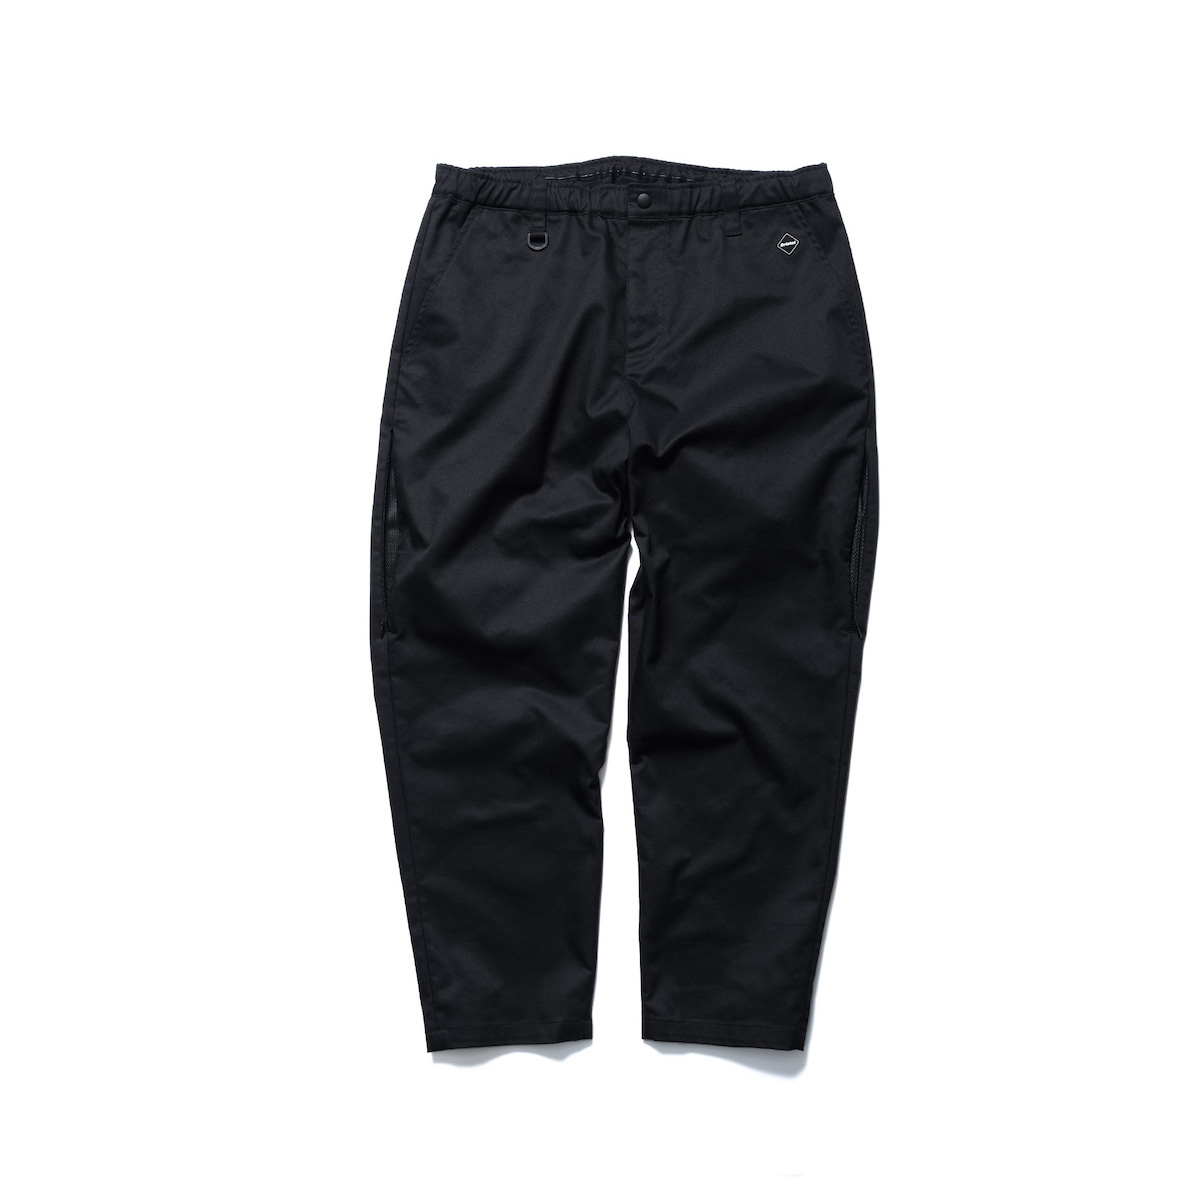 F.C.Real Bristol / COOLMAX STRETCH WIDE CROPPED VENTILATION CHINO PANTS (Black)